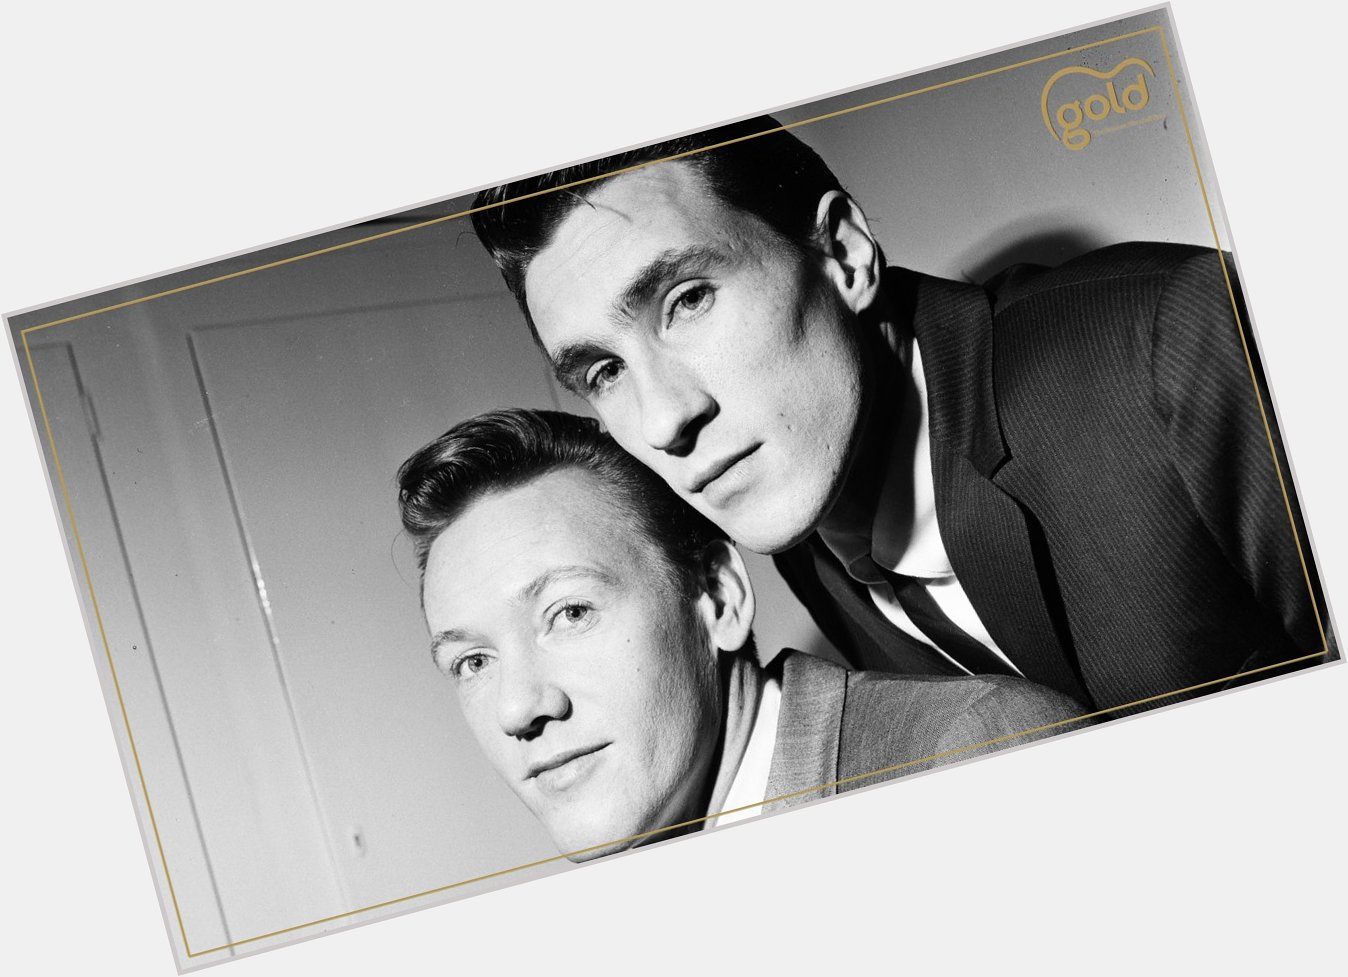 Happy 80th birthday, Bill Medley! Here he is looking rather suave with his fellow Righteous Brother Bobby... 